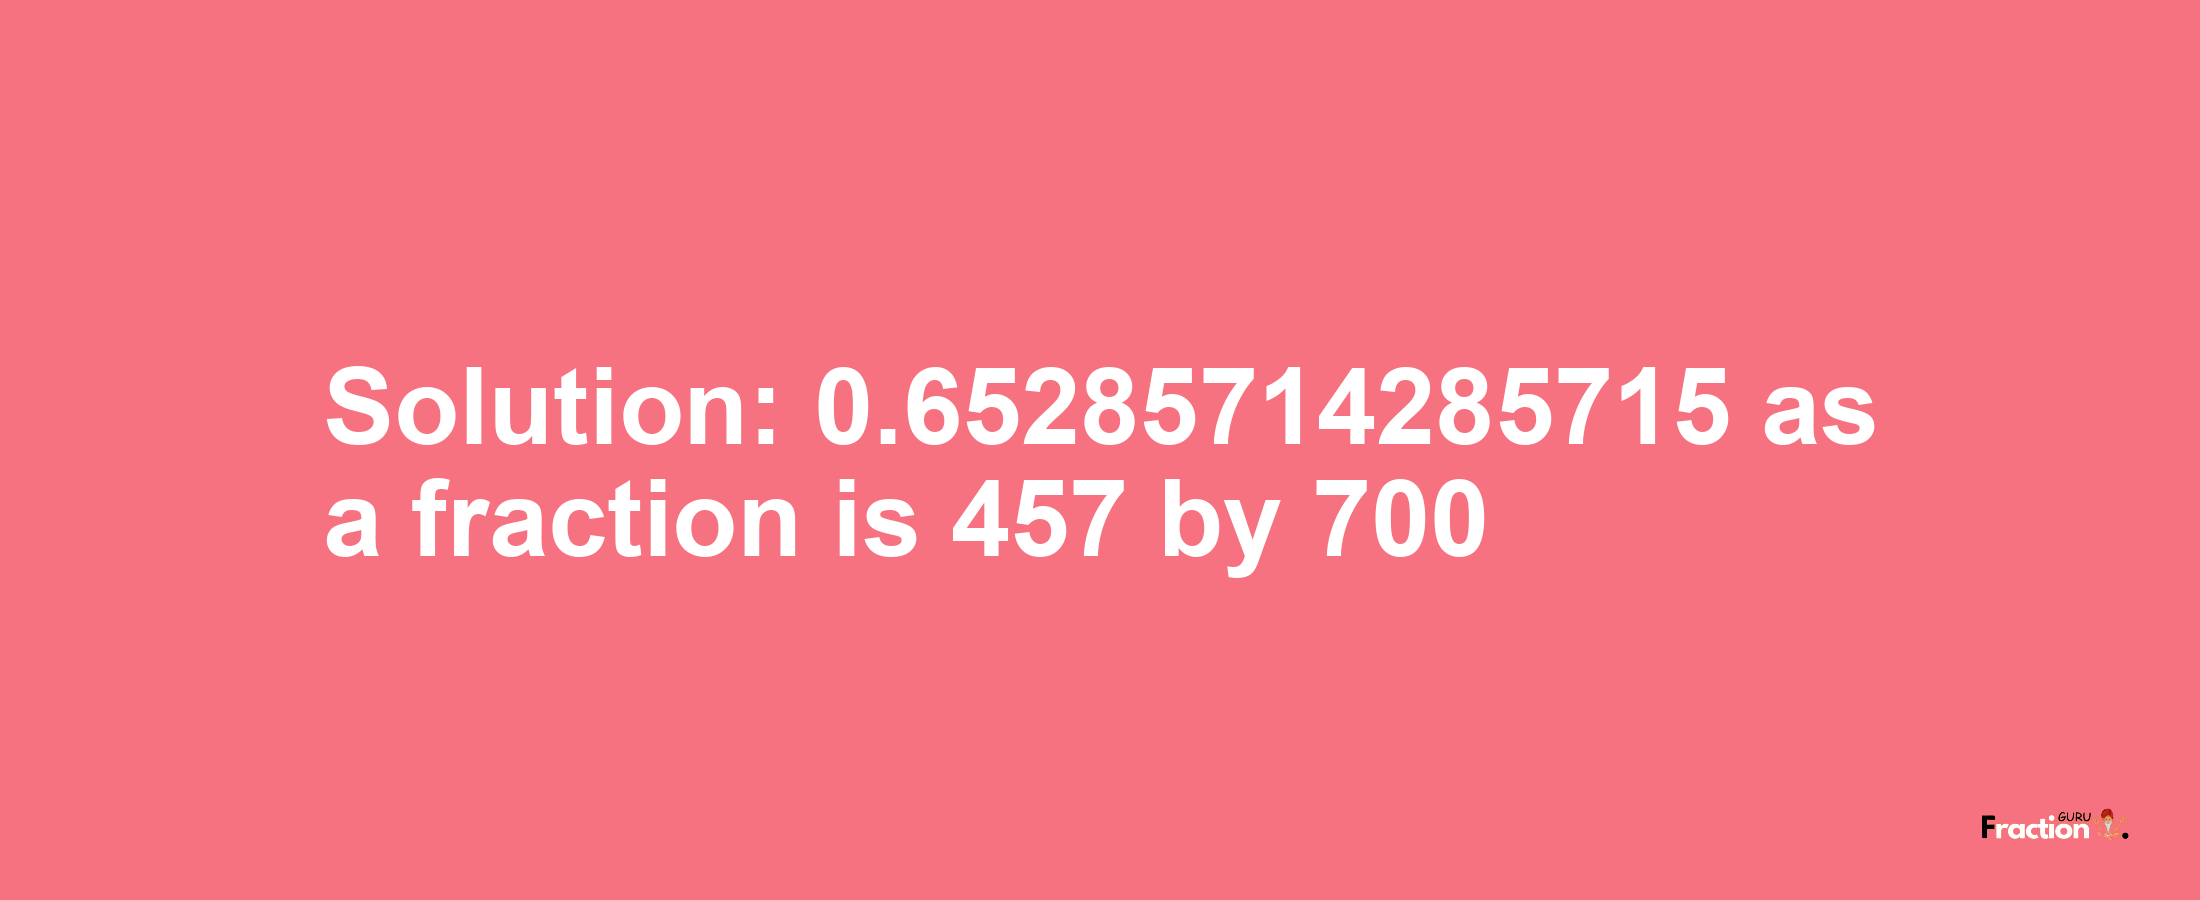 Solution:0.65285714285715 as a fraction is 457/700